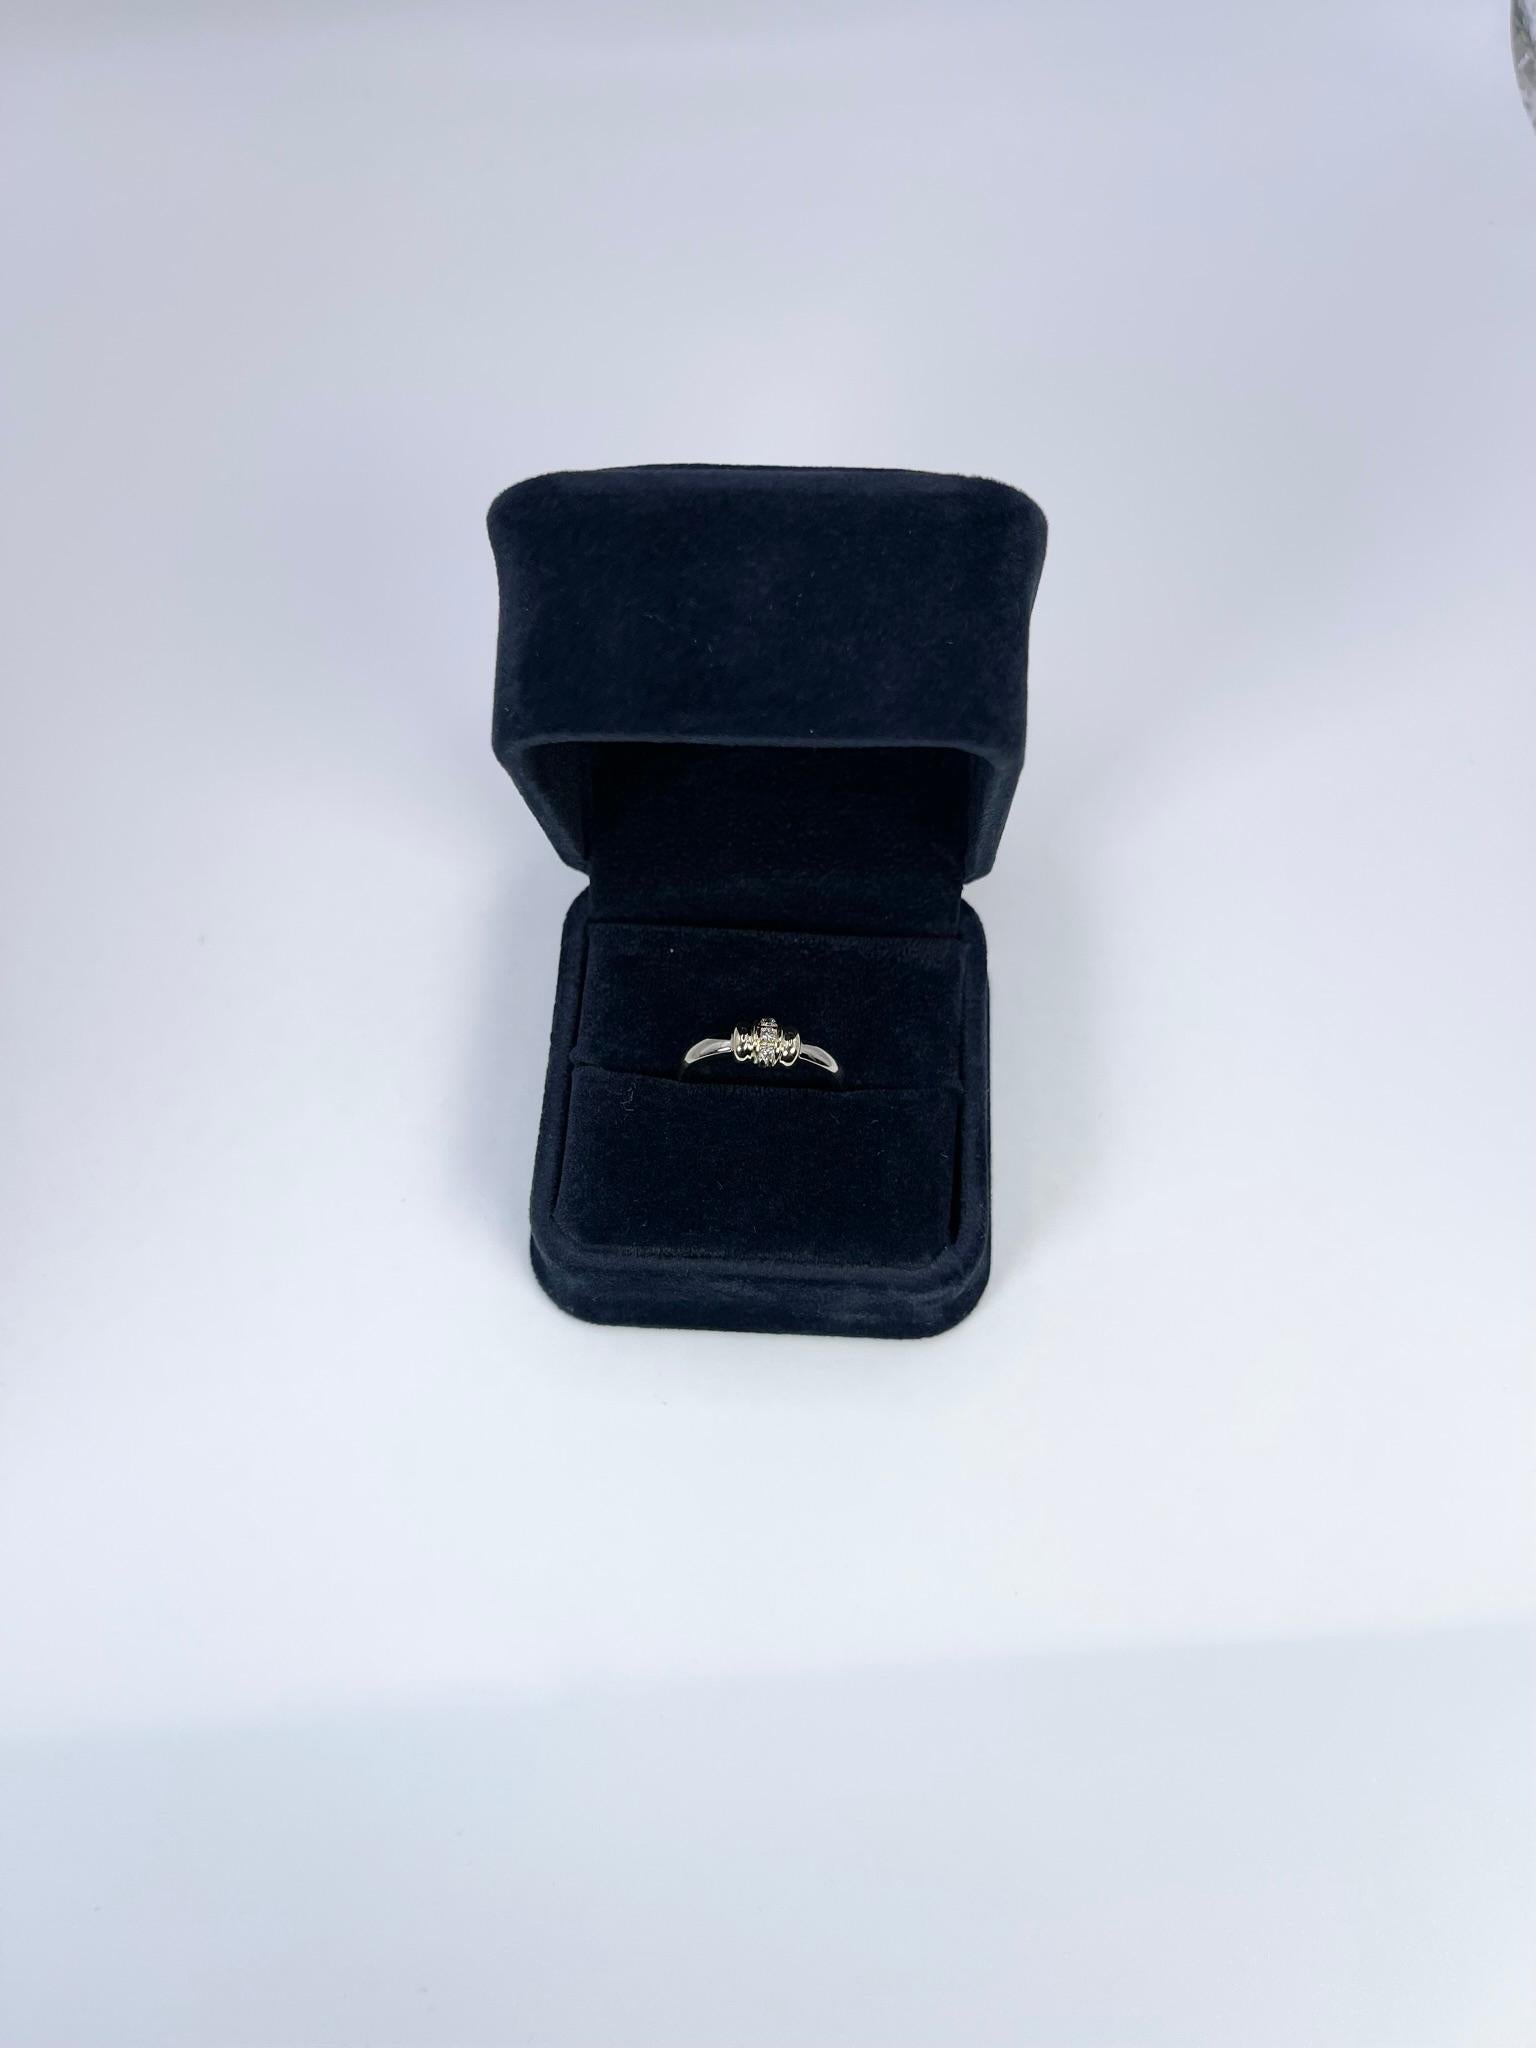 Stunning diamond ring, stacking modern style in 14KT white gold.

GRAM WEIGHT: 4.07gr
GOLD: 14KT white/yellow gold

NATURAL DIAMOND(S)
Cut: Round Brilliant 
Color: G-H (average)
Clarity: SI (average)
Carat: 0.06ct
Size: 7 (can be re-sized)
Item#: